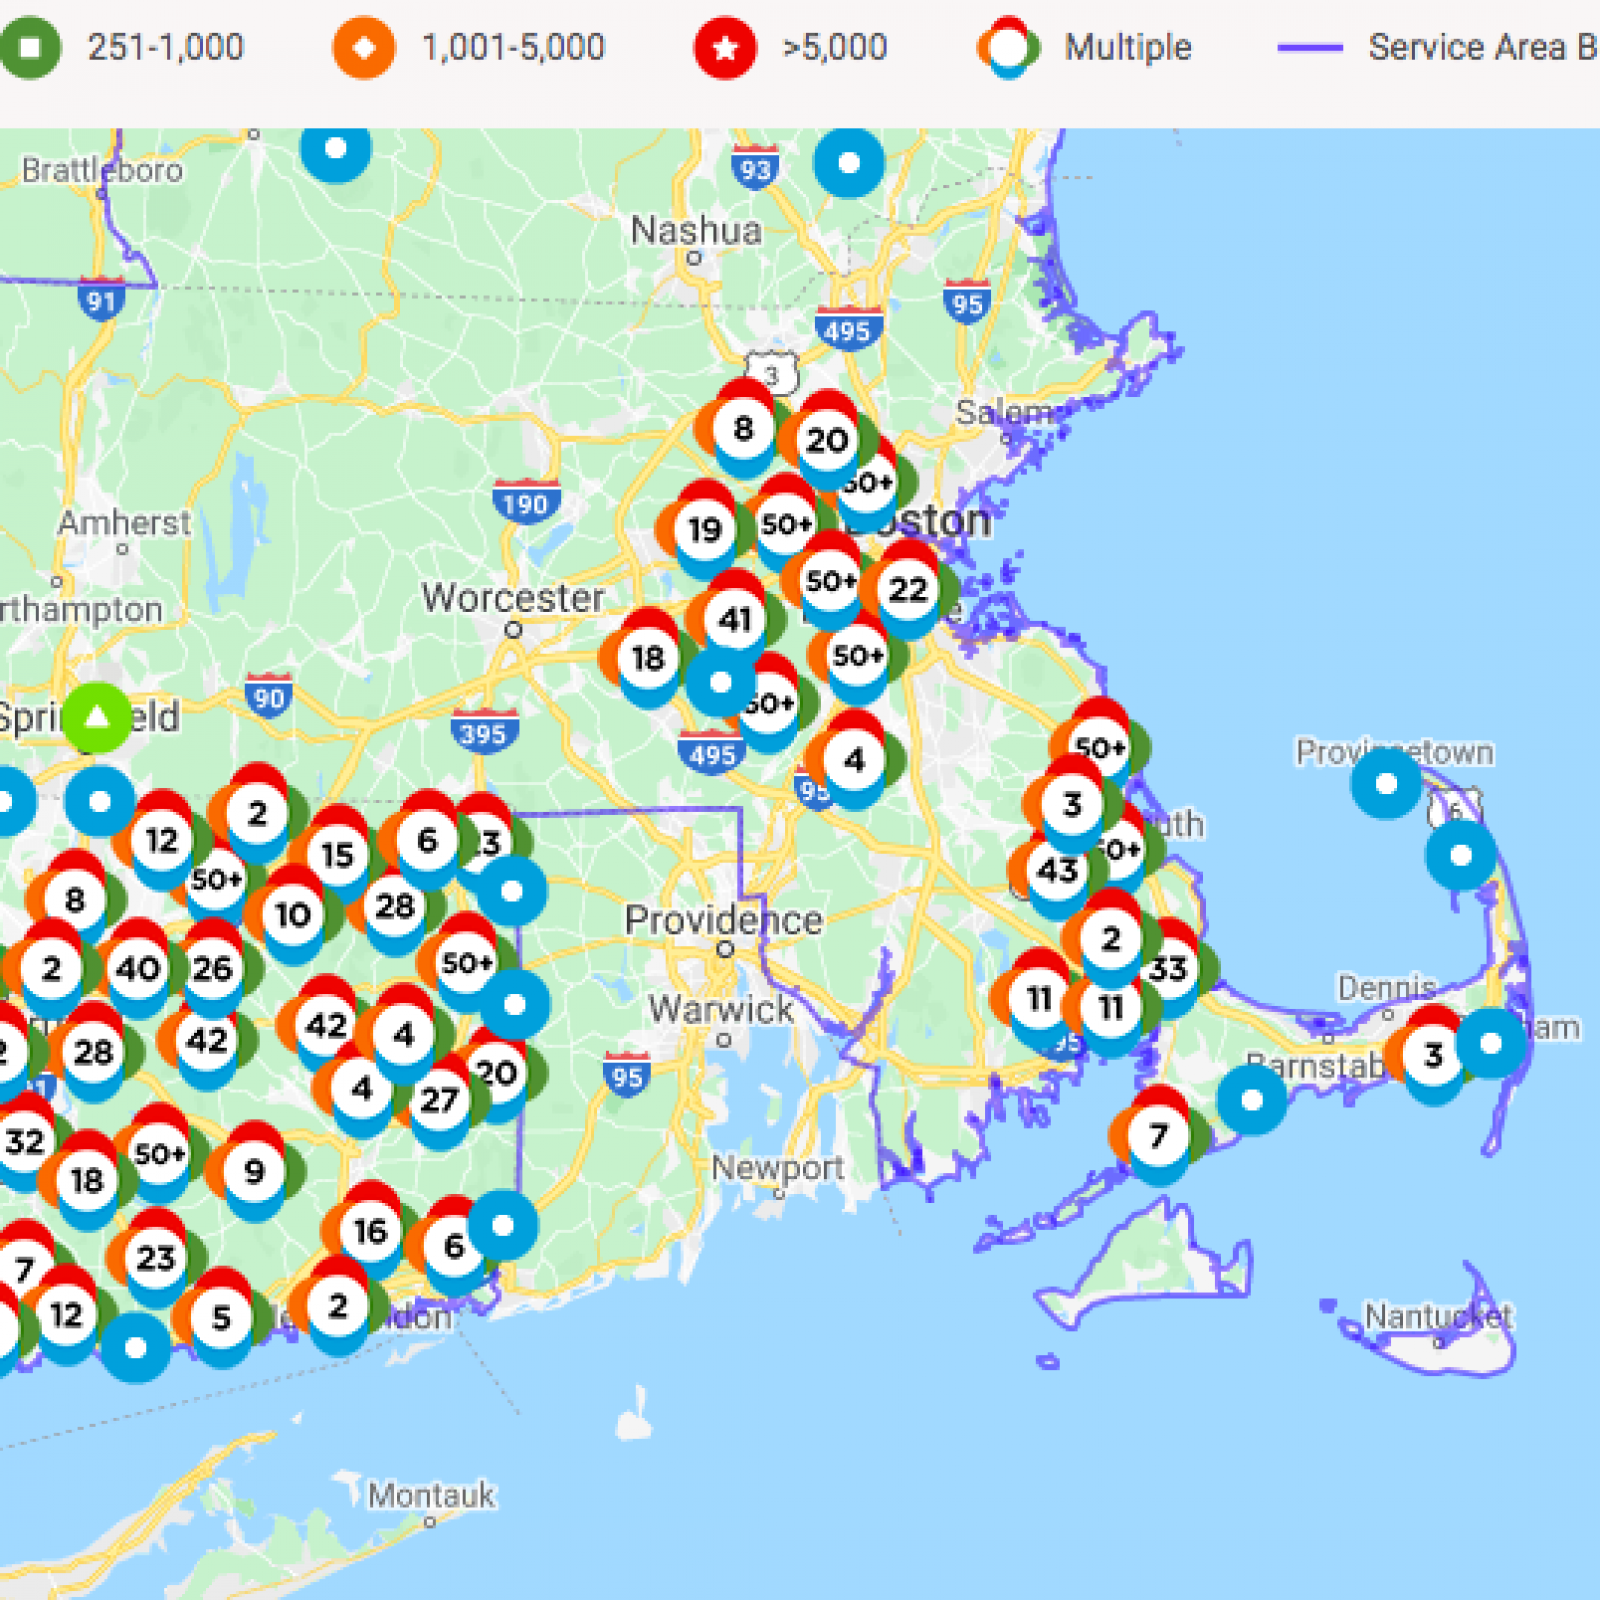 Eversource Power Outage Map Eversource Power Outage Map as Storm Leaves Connecticut 